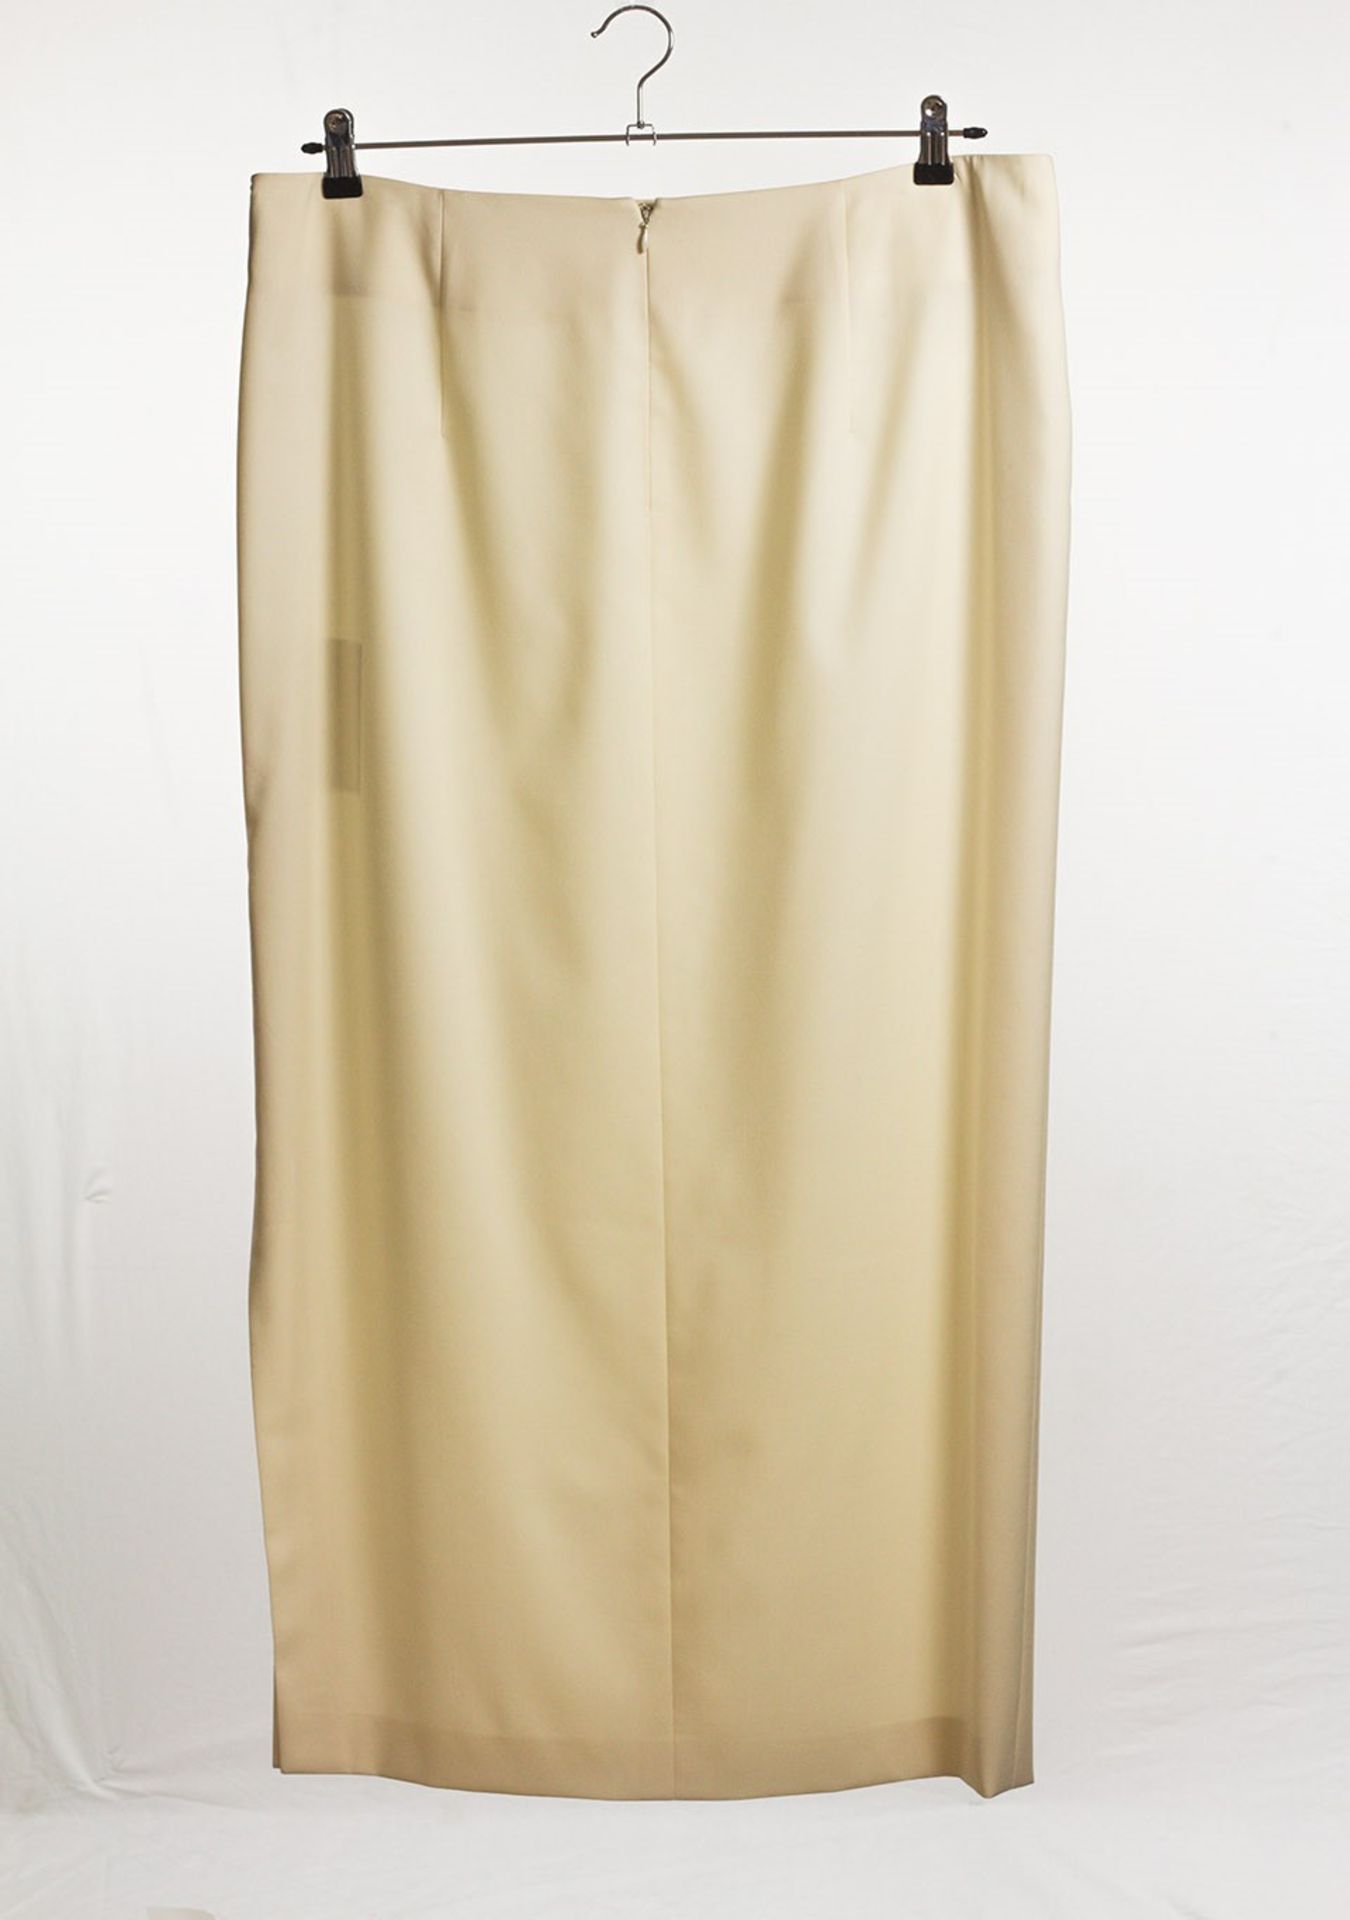 1 x Boutique Le Duc Cream Skirt - Size: 22 - Material: 100% Wool - From a High End Clothing Boutique - Image 5 of 10